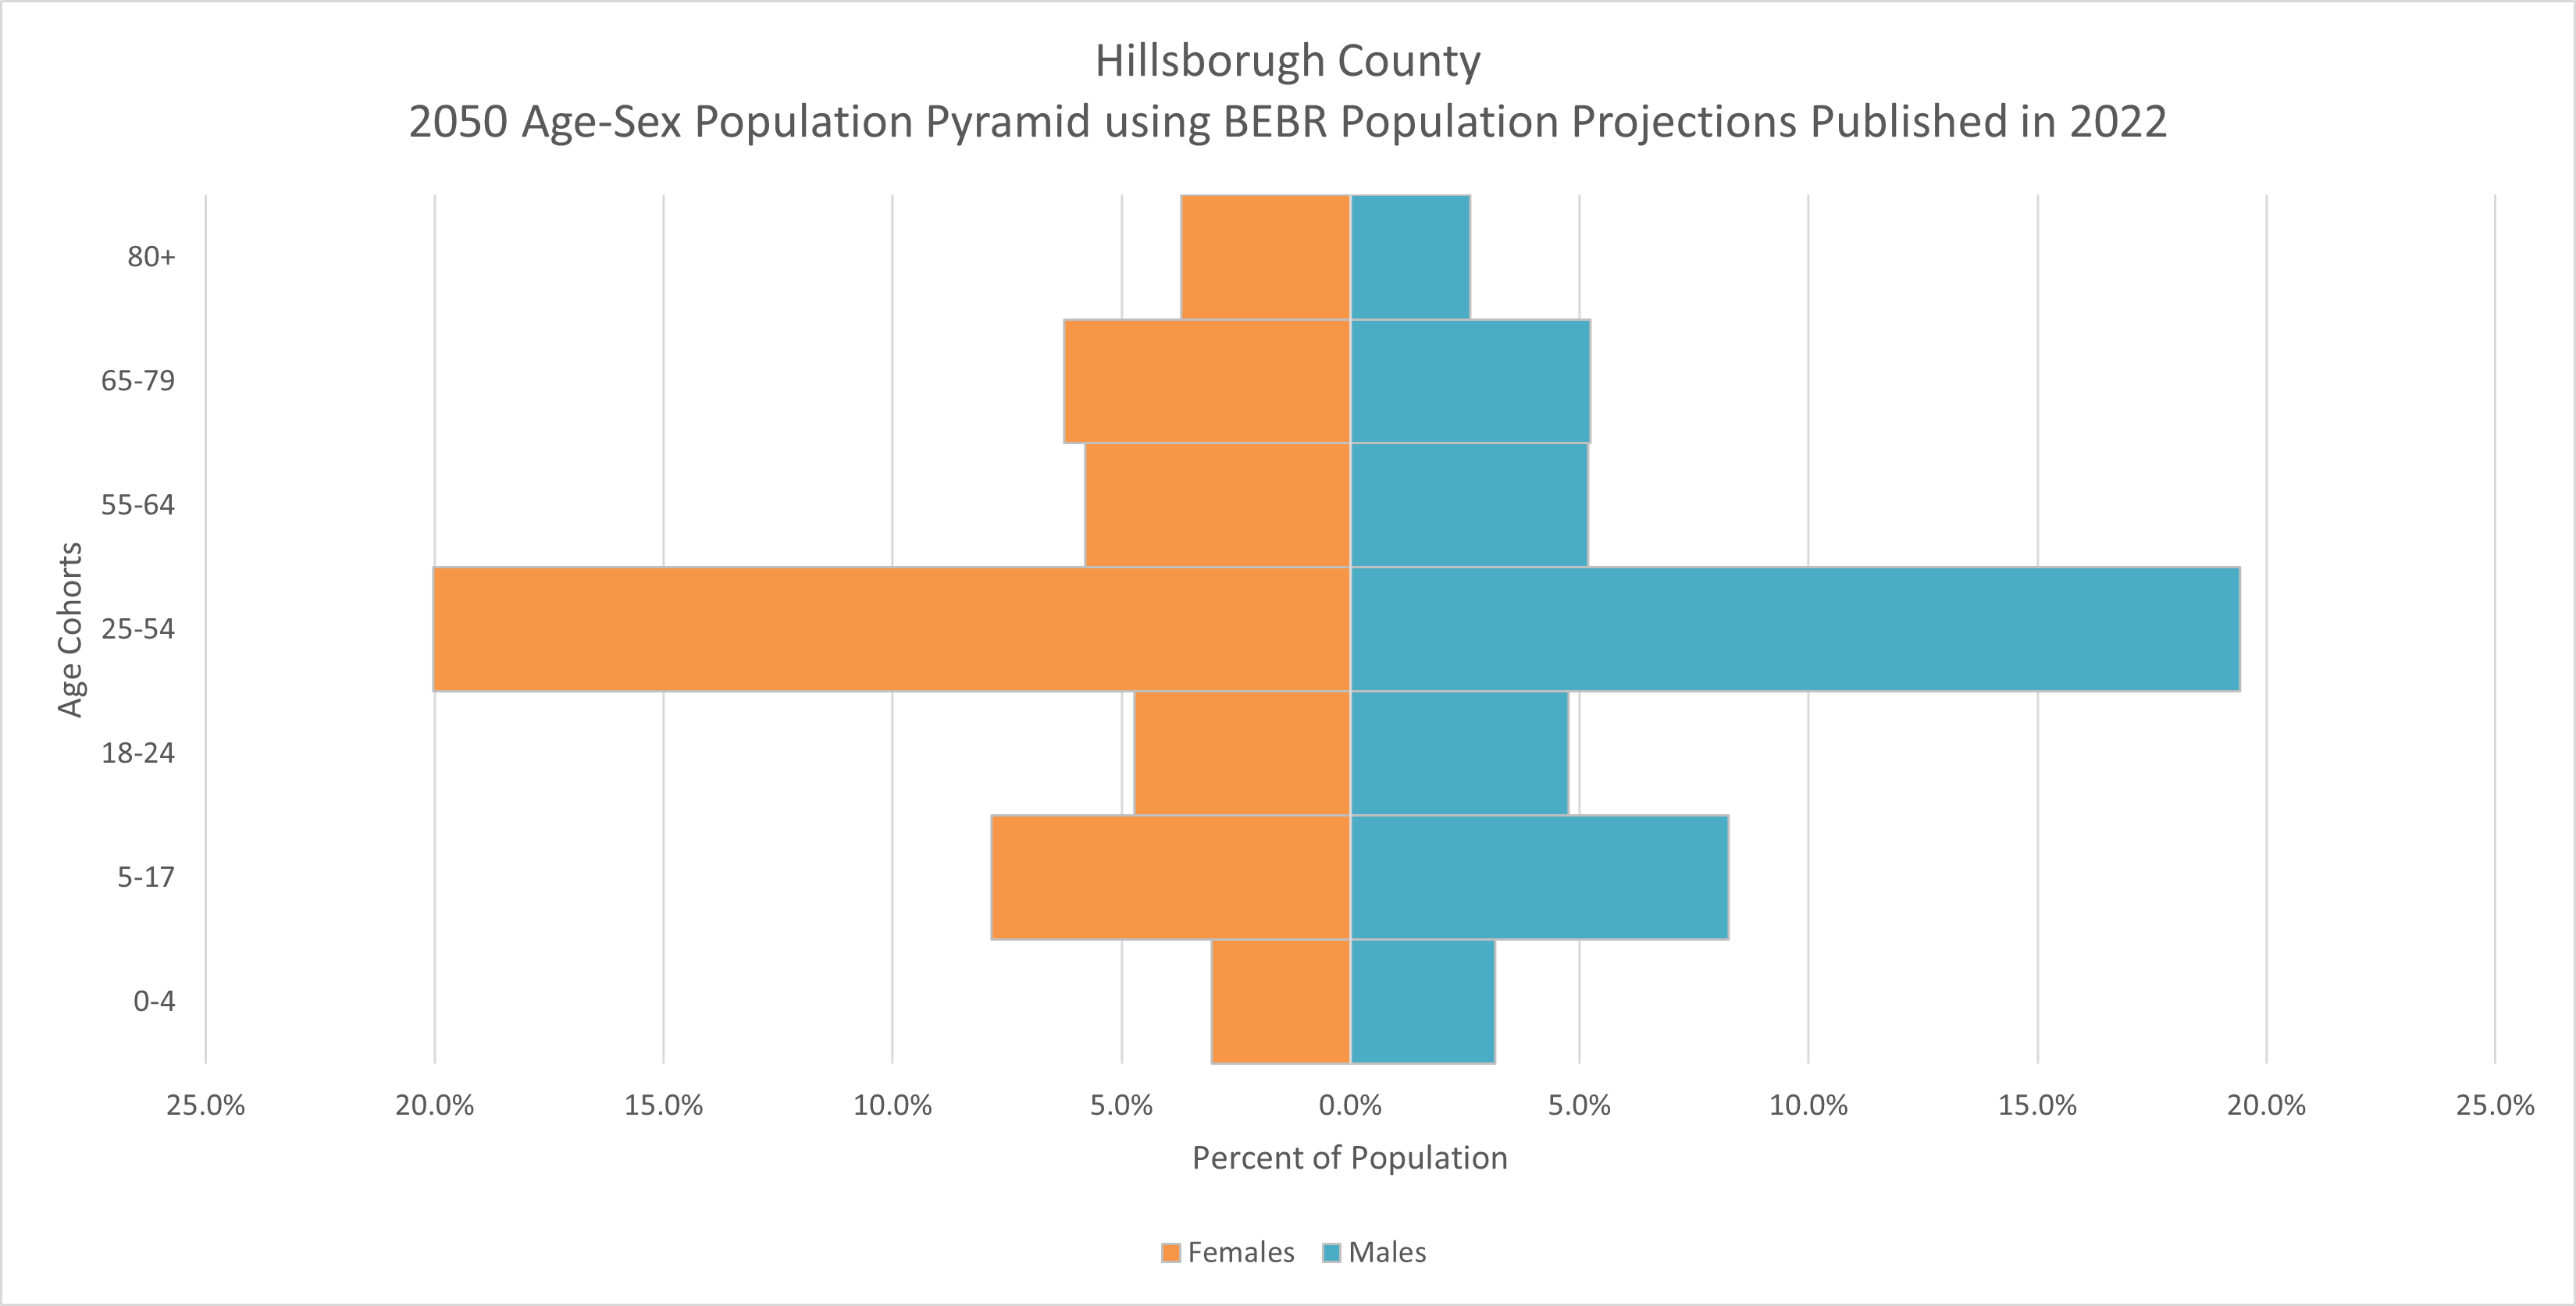 This chart shows a 2050 population pyramid for Hillsborough County. The 2020 population is broken down into 7 age cohorts: Ages 0-4. ages 5-17, ages 18-24, ages 25-54, ages 55-64, ages 65-79, and ages 80+. The largest age cohort (ages 25-54) represent 39.4% of the 2020 population.